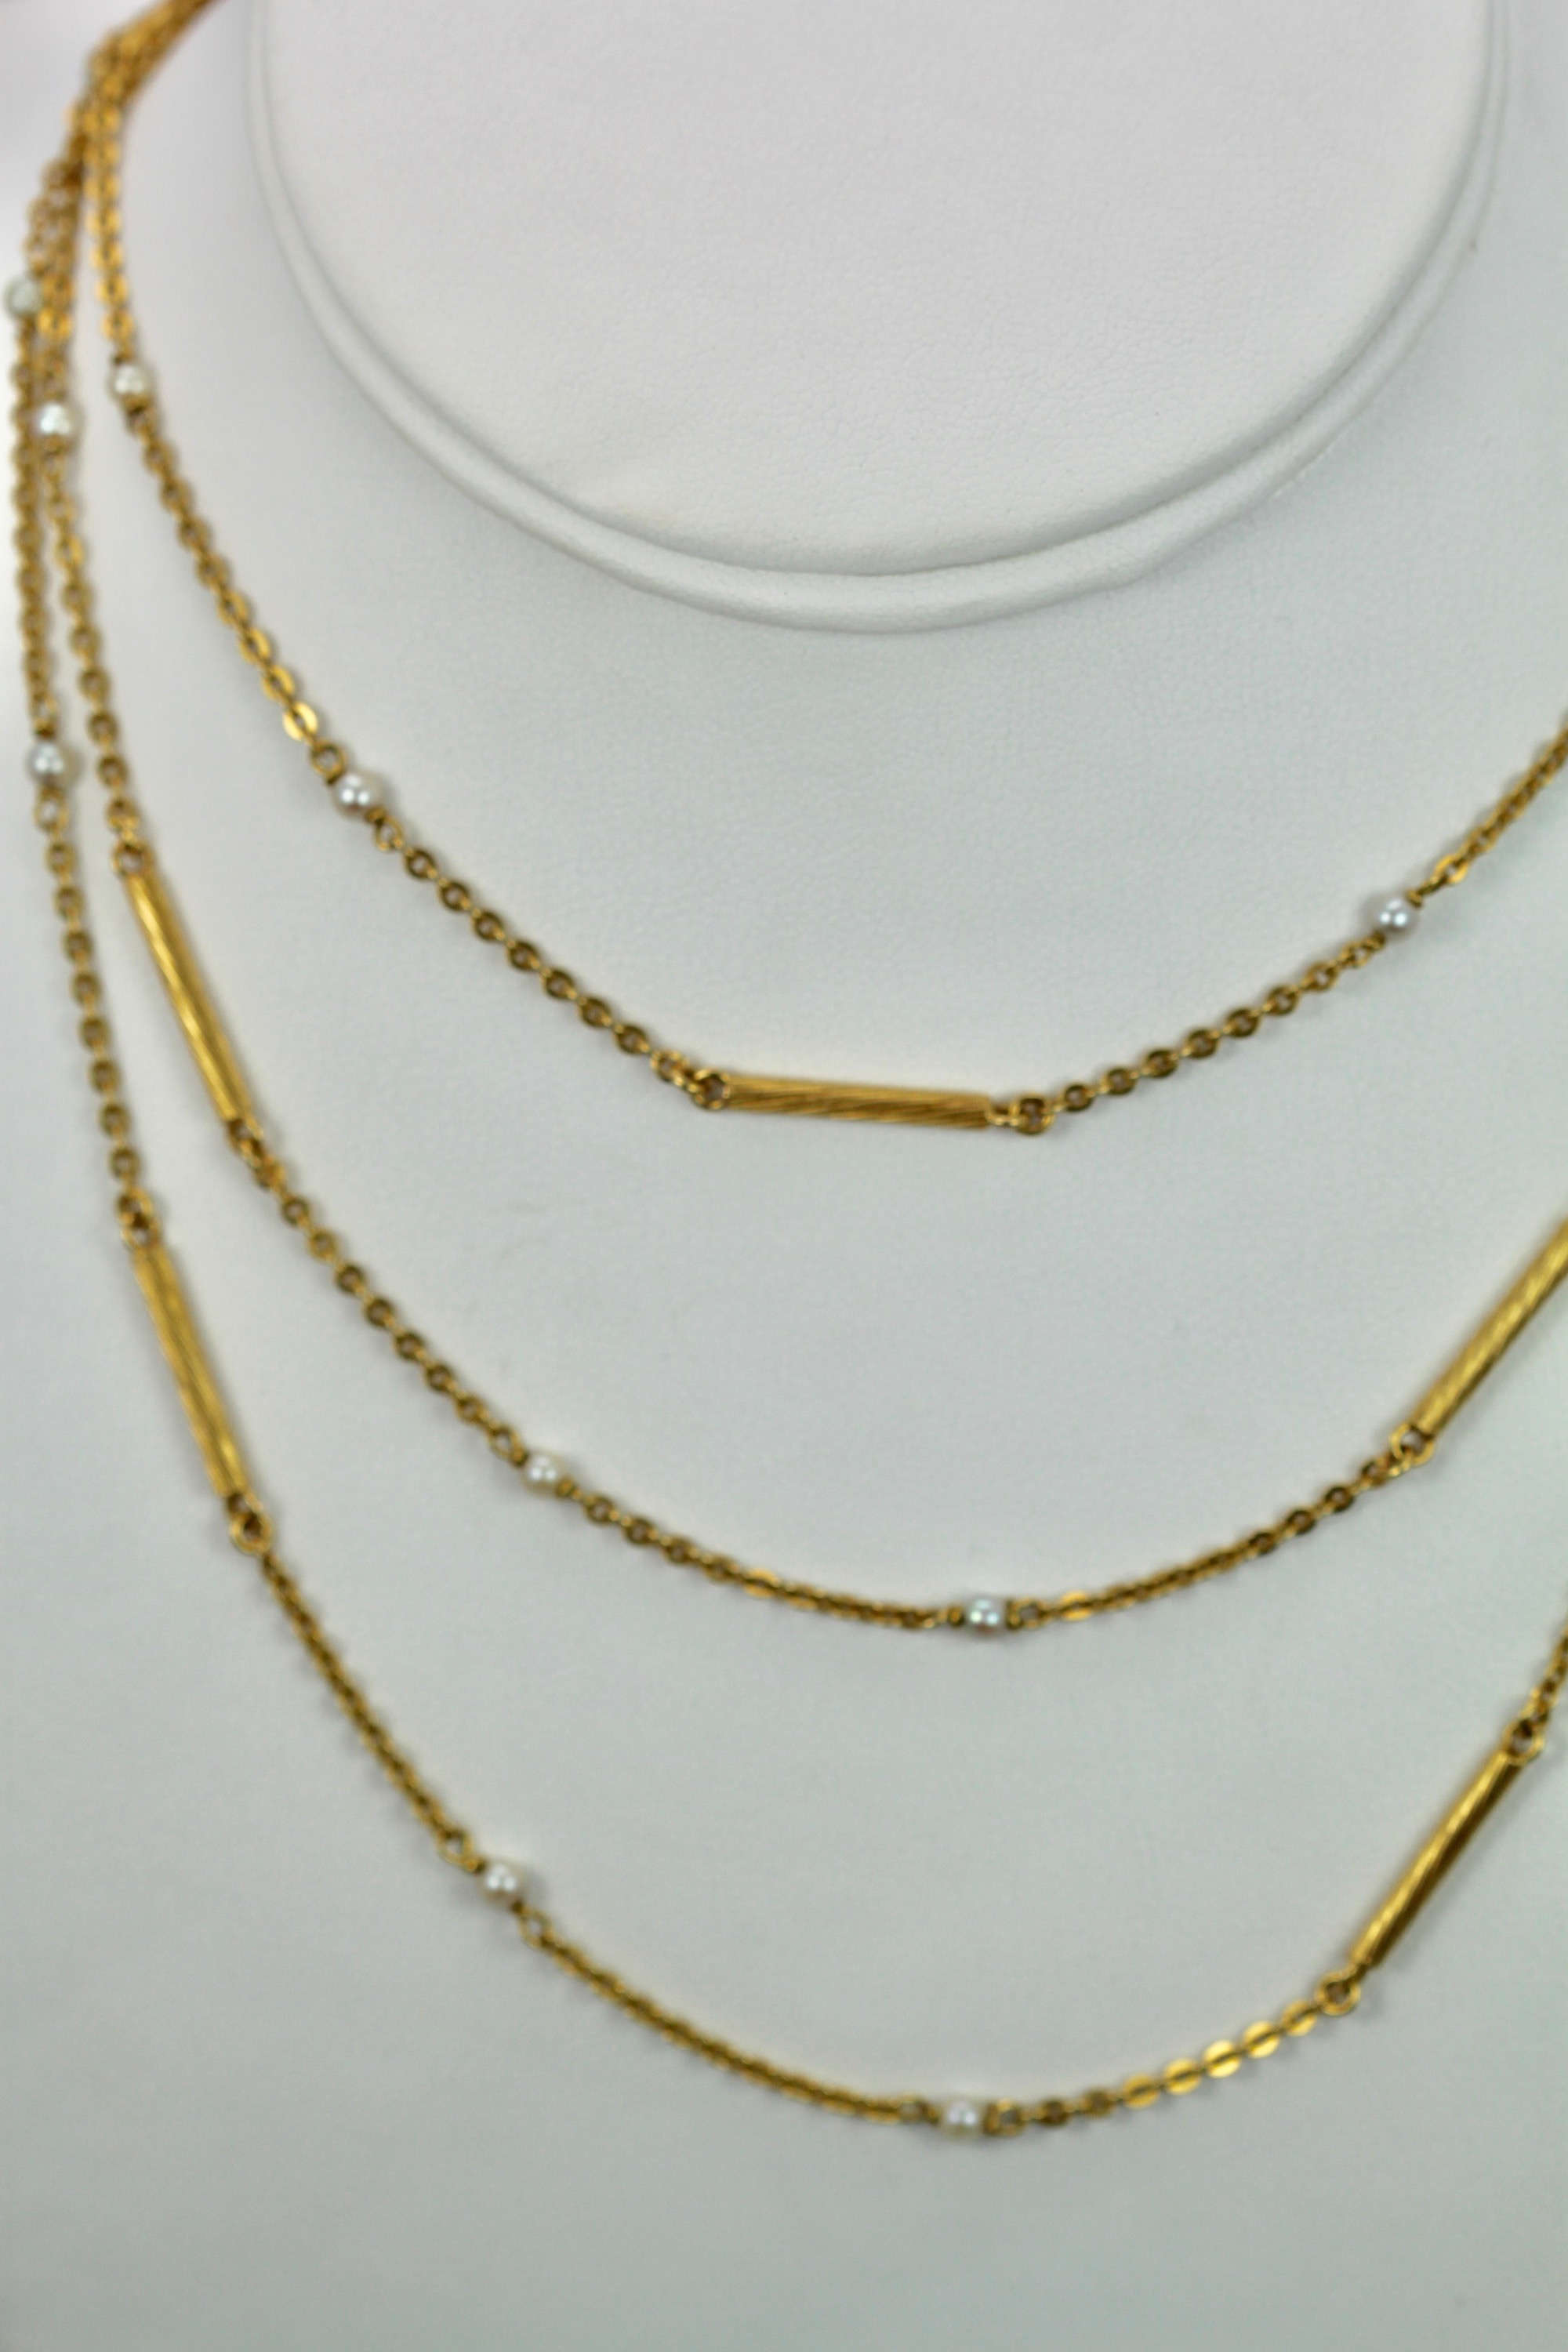 Seed Pearl Chain Extra Long 32″ 18K Yellow Gold #7